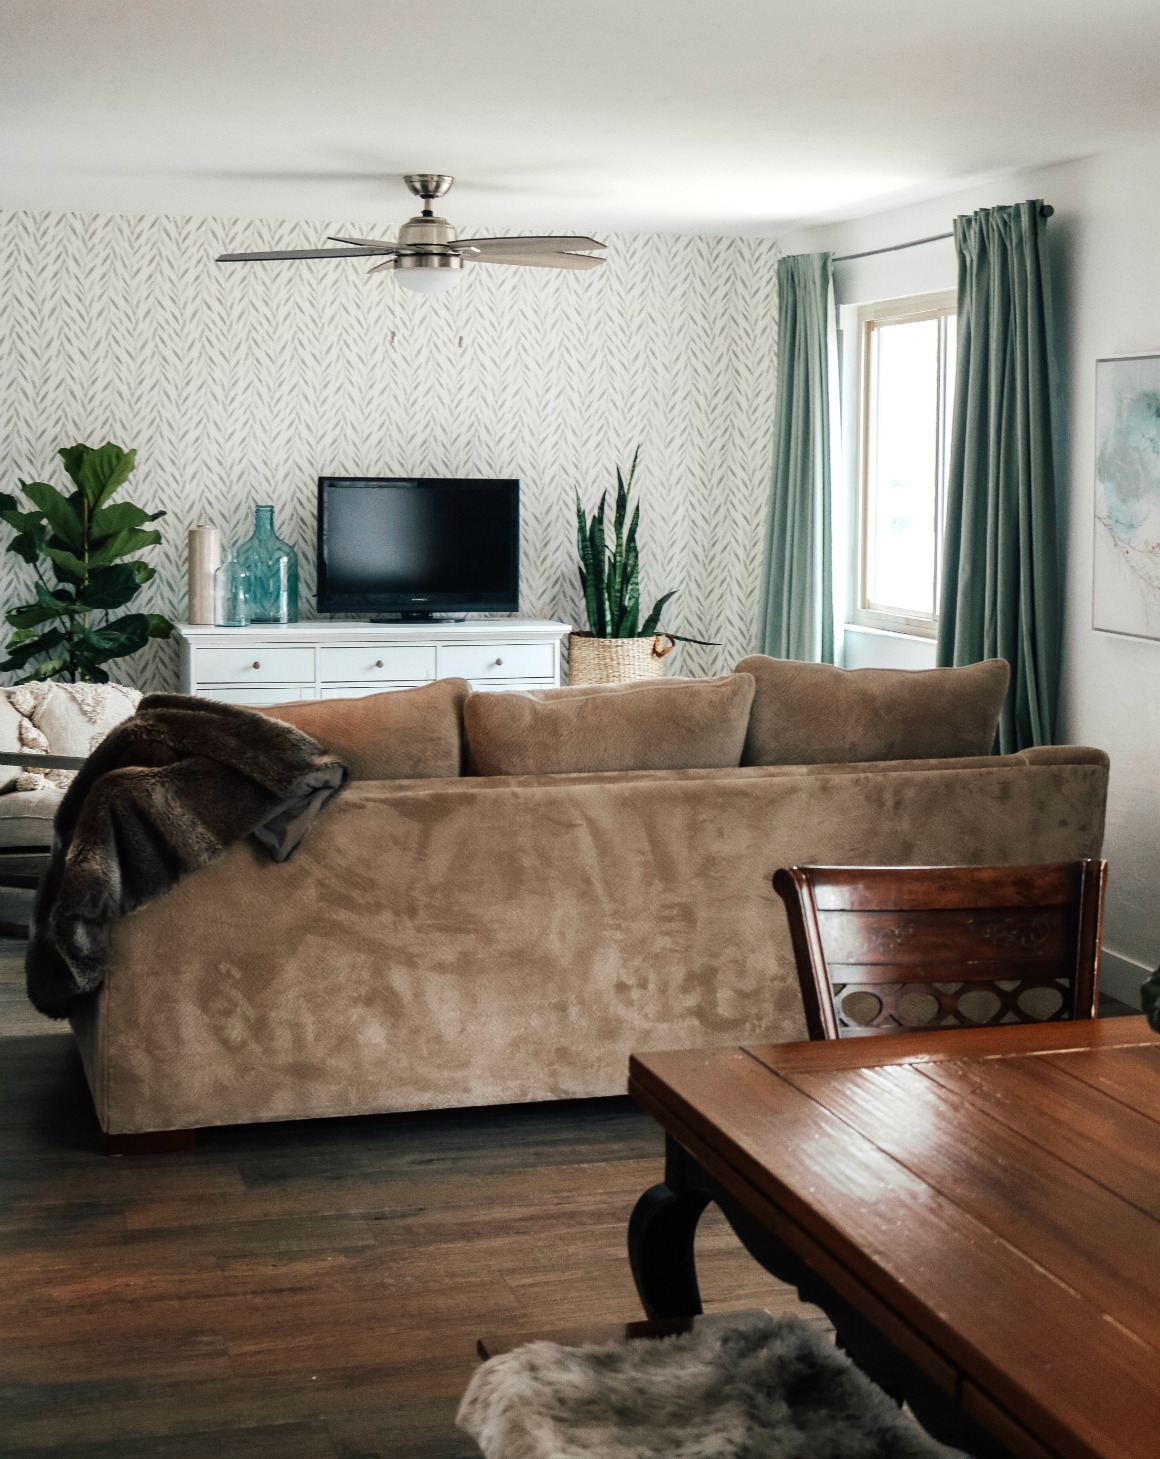 Mini Affordable Living Room Update with Joanna Gaines Wallpaper